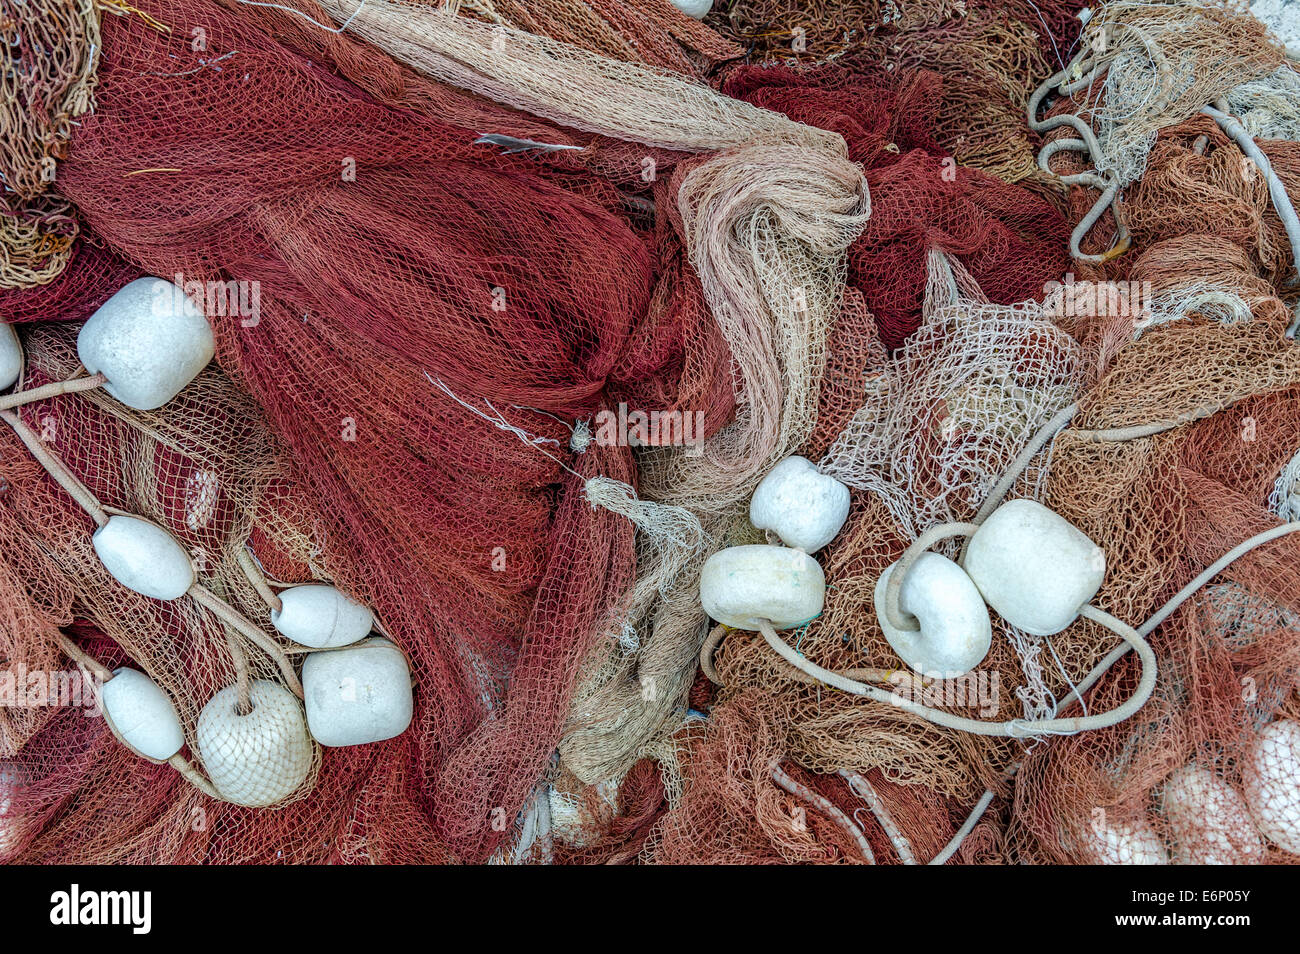 Fishing nets with small white stones. Stock Photo